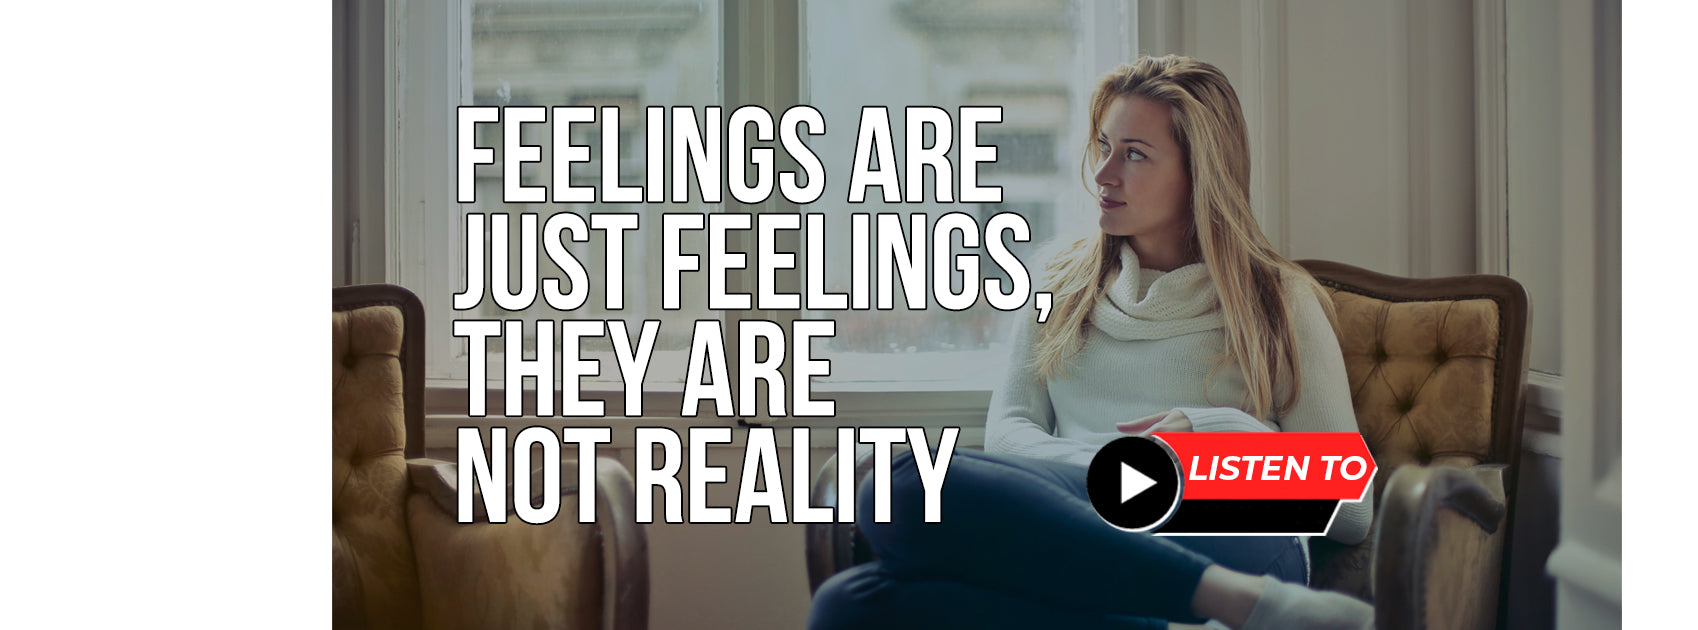 Feelings Are Just Feelings, They Are Not Reality